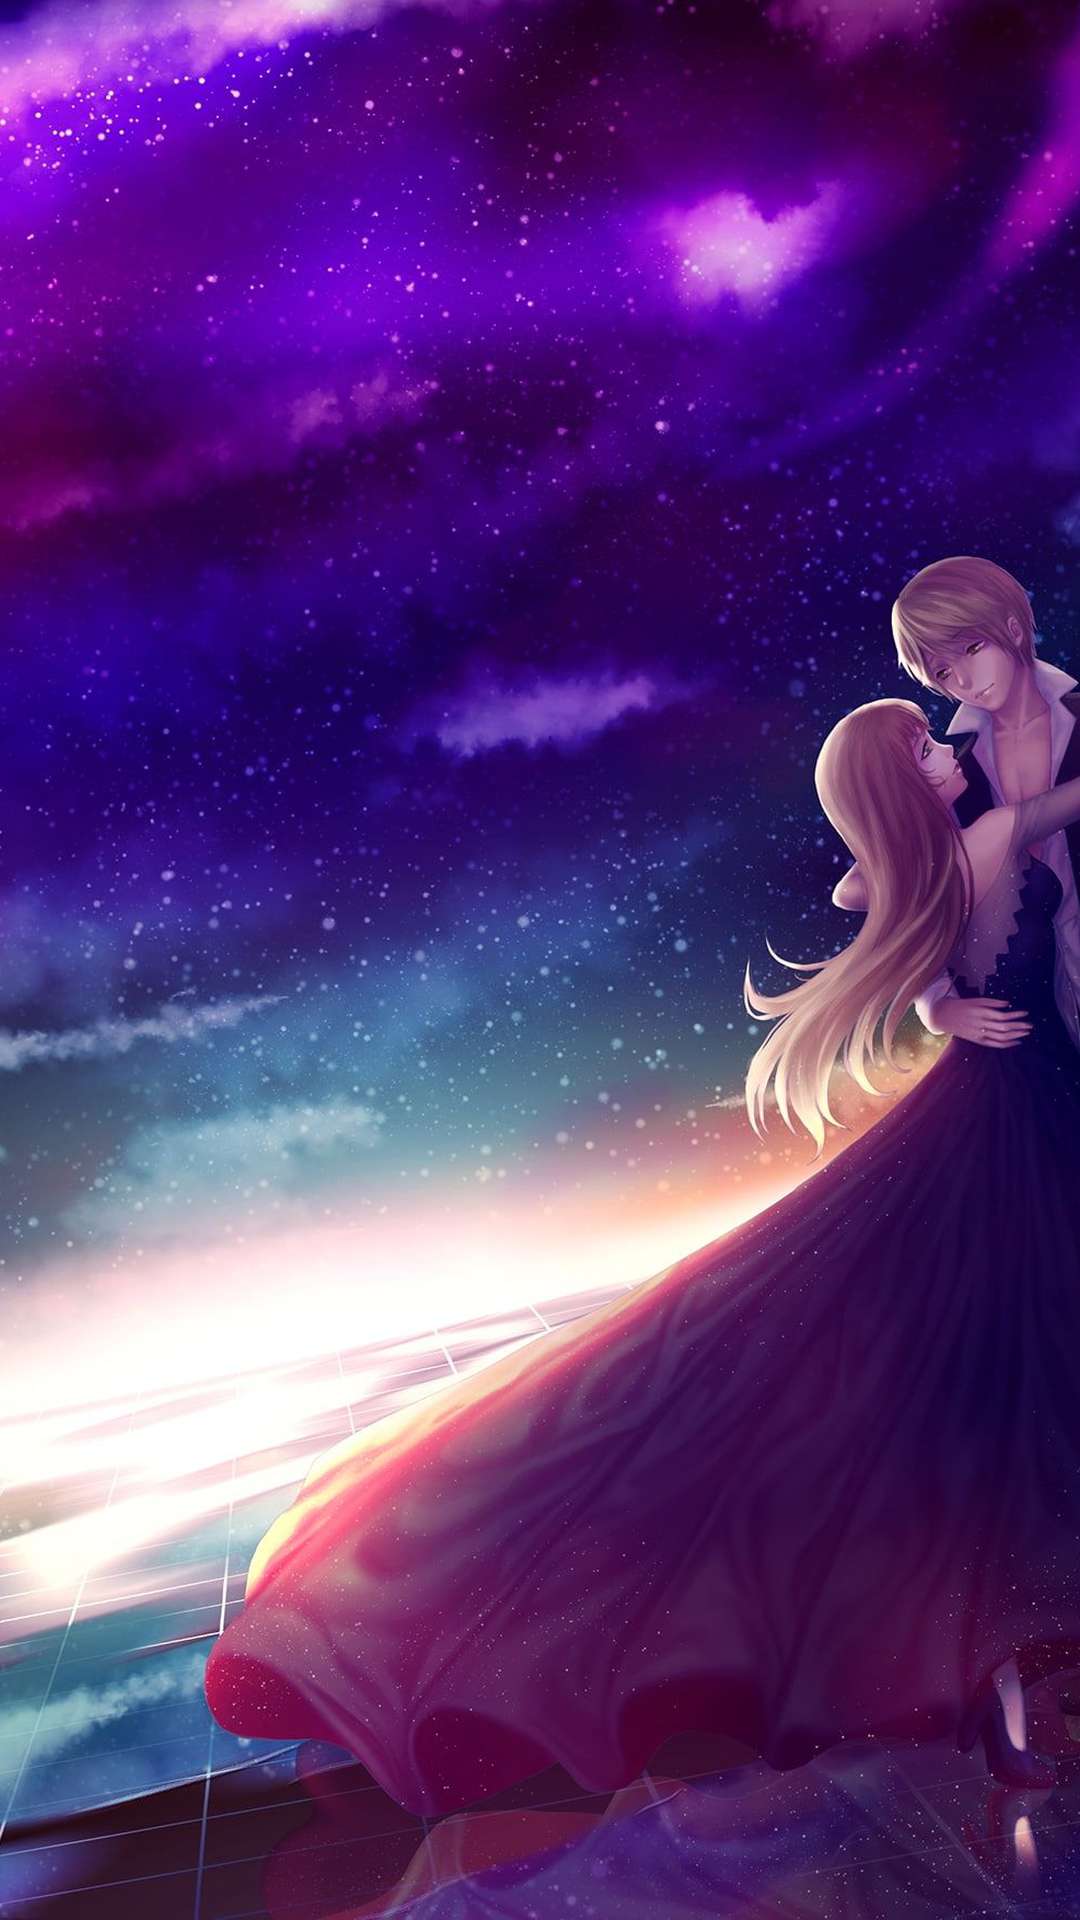 Anime-Love-Couple-Kissing-Wallpaper by Hime-Fiore on DeviantArt